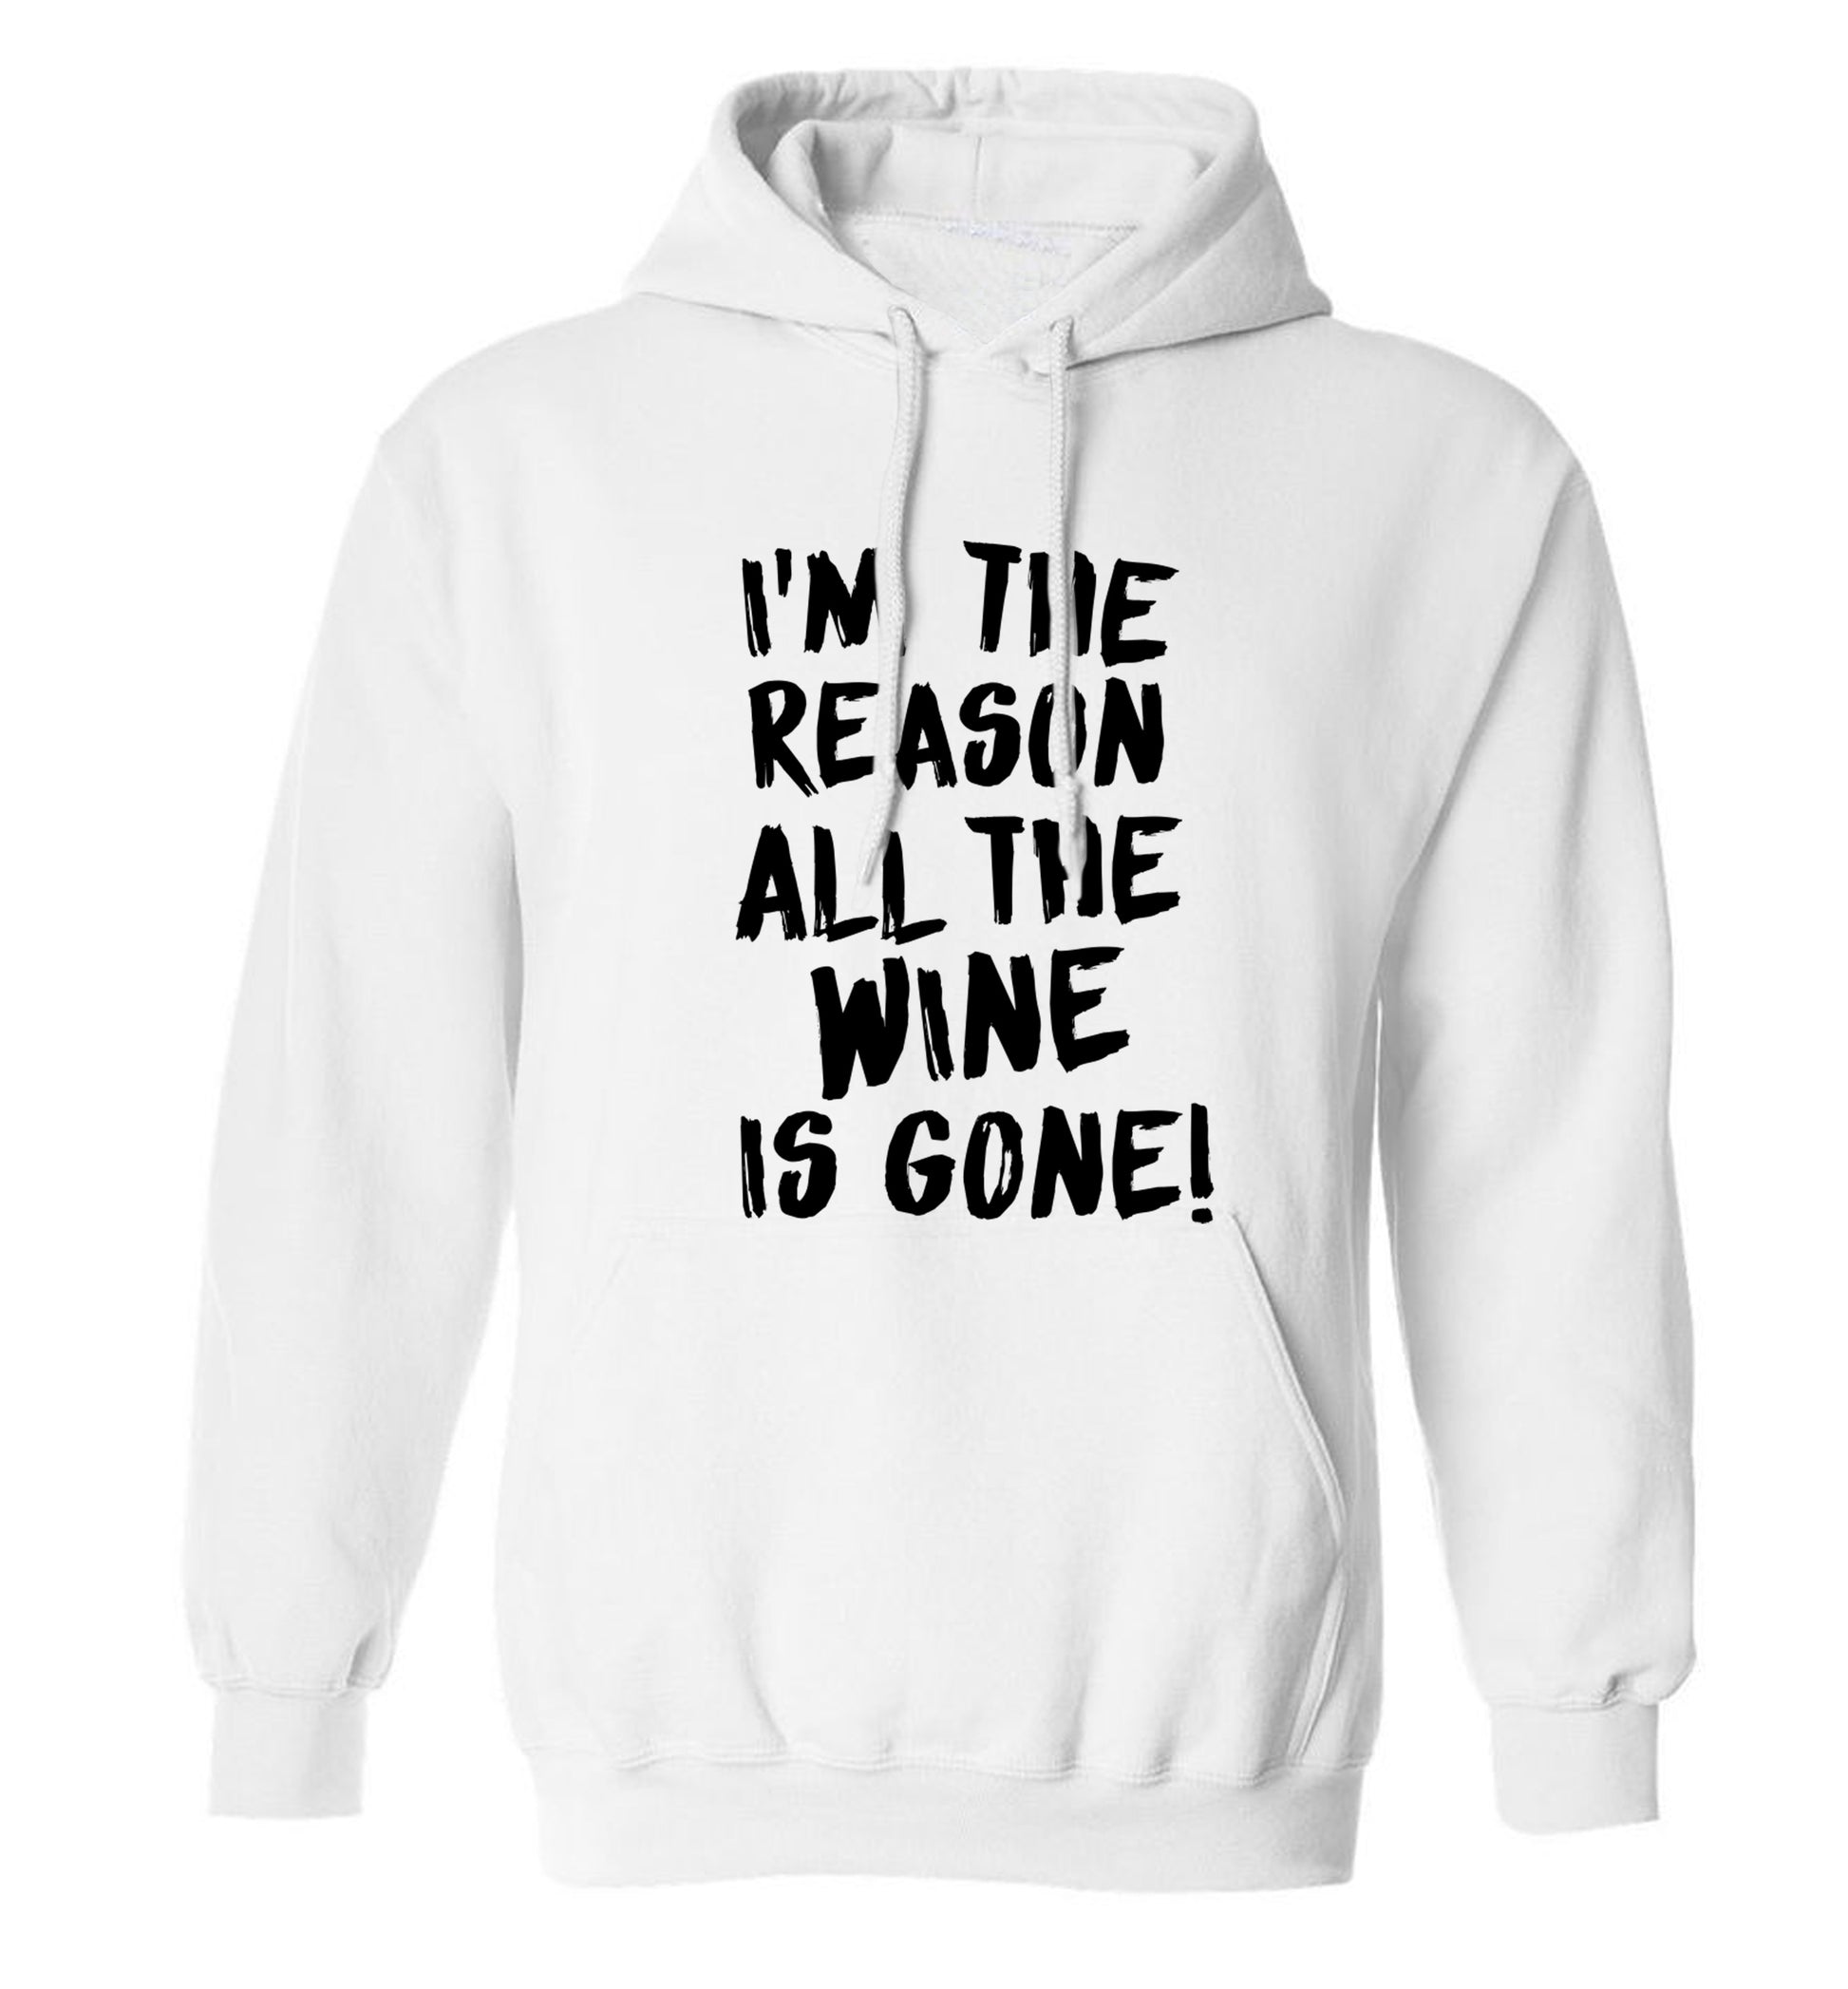 I'm the reason all the wine is gone adults unisex white hoodie 2XL